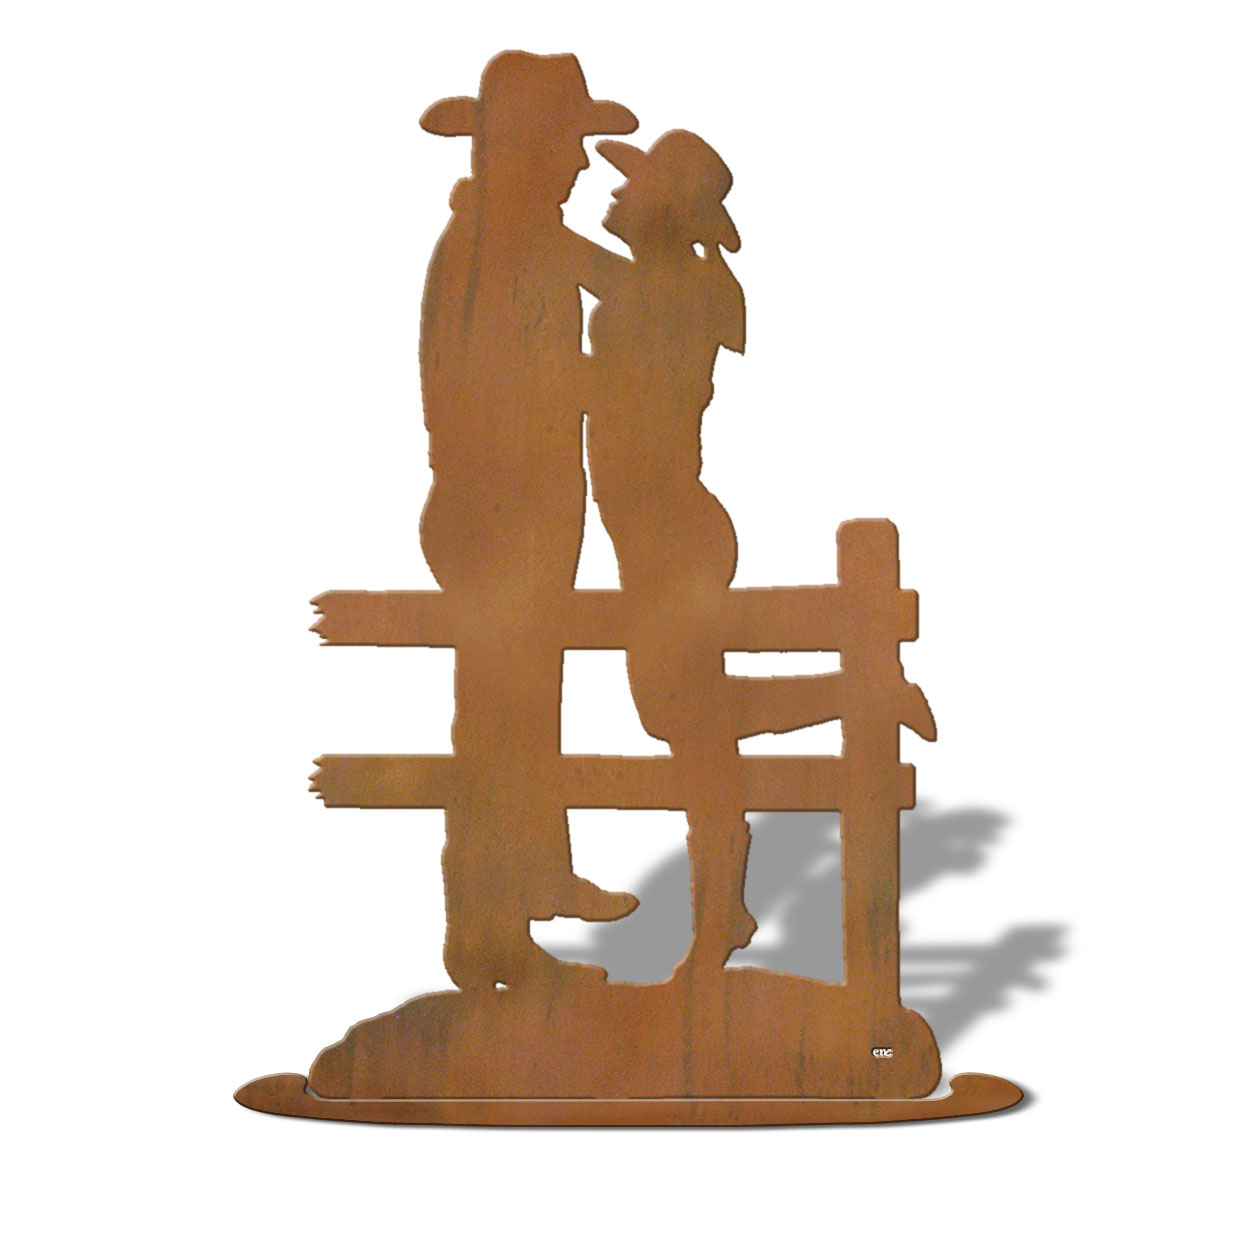 623404r - Tabletop Art - 11in x 18in - Cowboy Lovers - Rust Patina